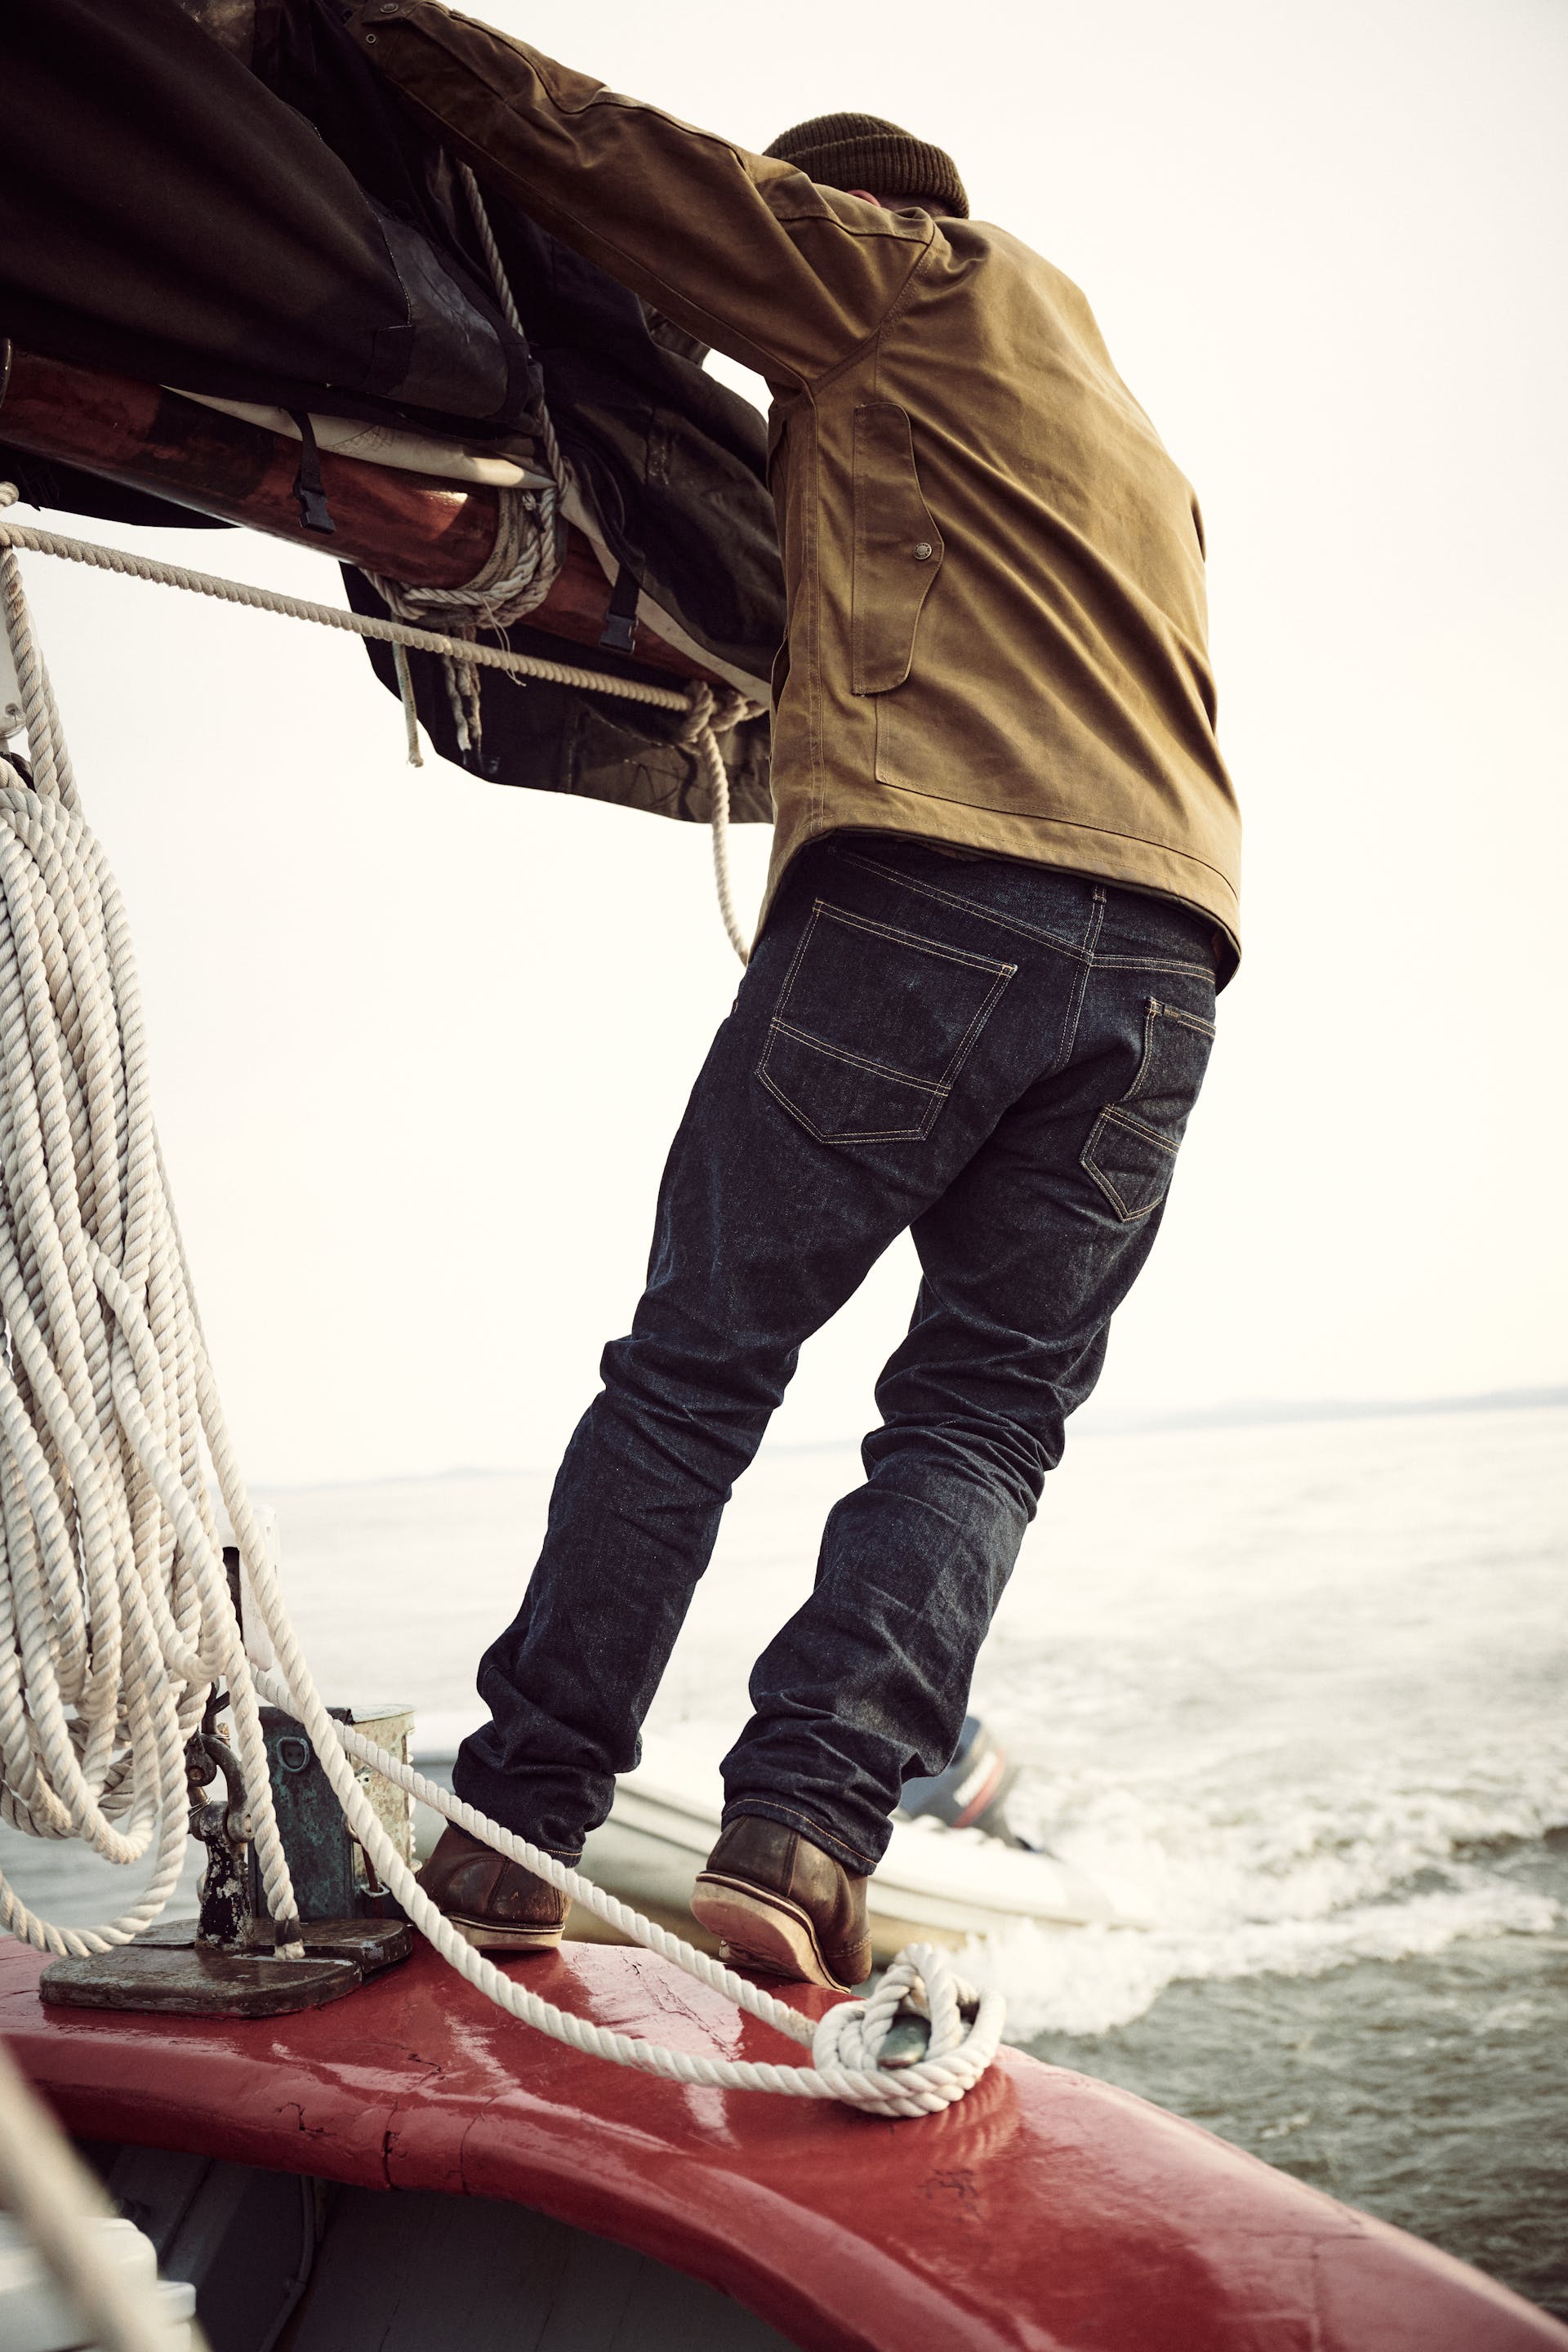 Sailor tying rope onto a mast wearing a Filson Lined Tin Cloth Cruiser Jacket